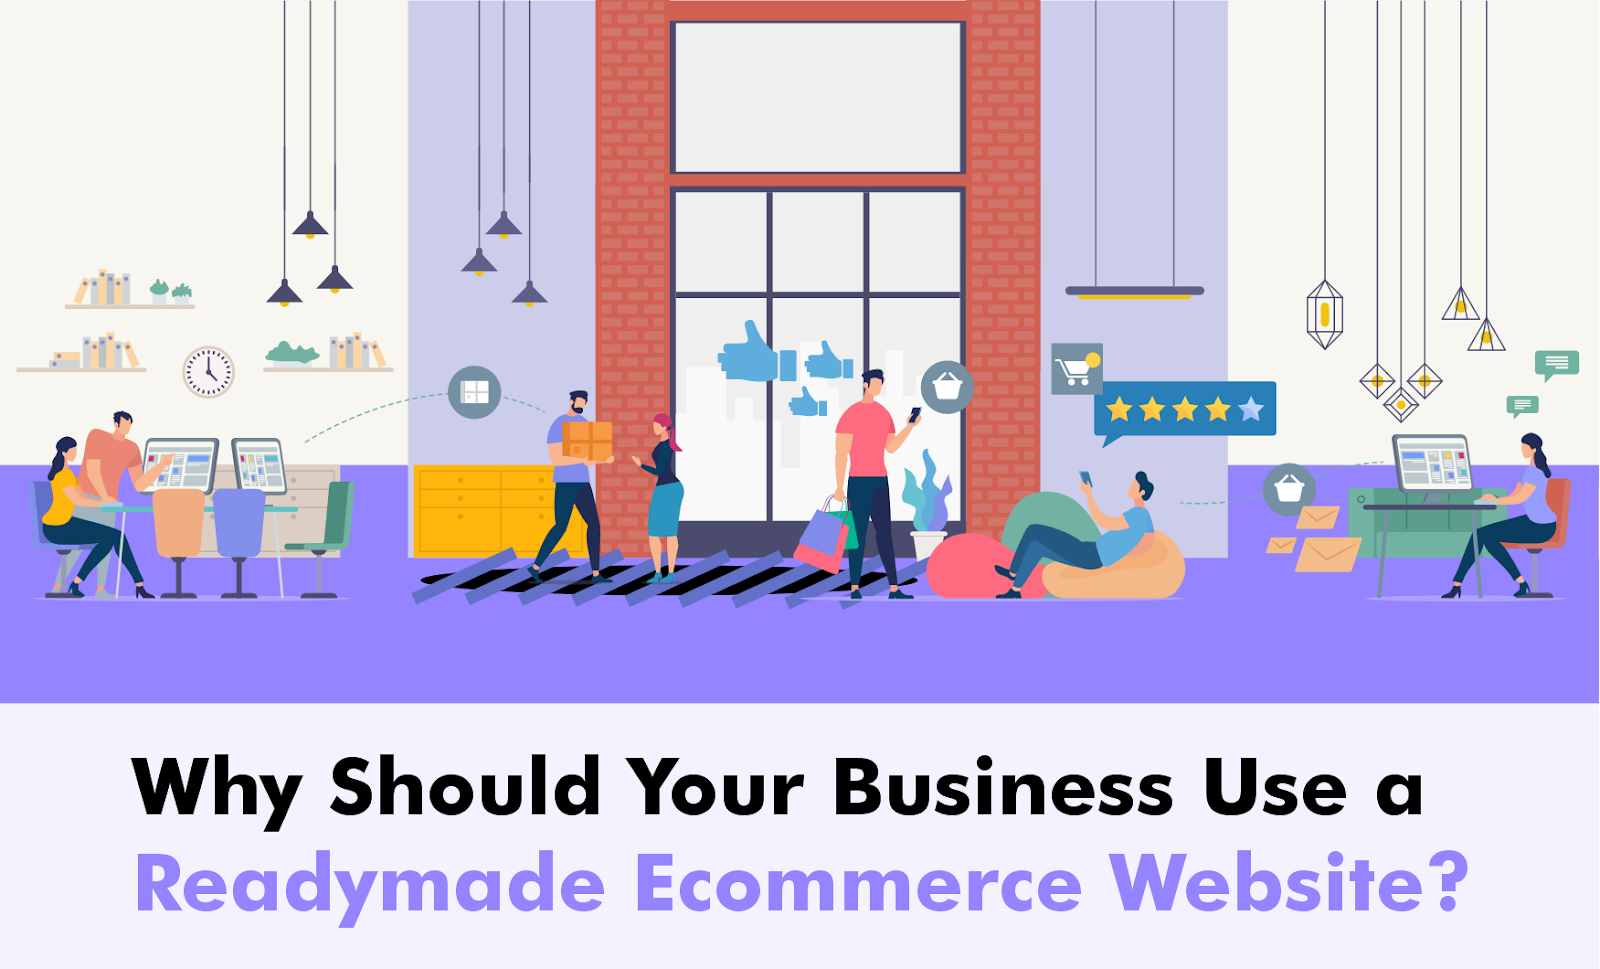 Reason for Choosing Readymade Ecommerce Website